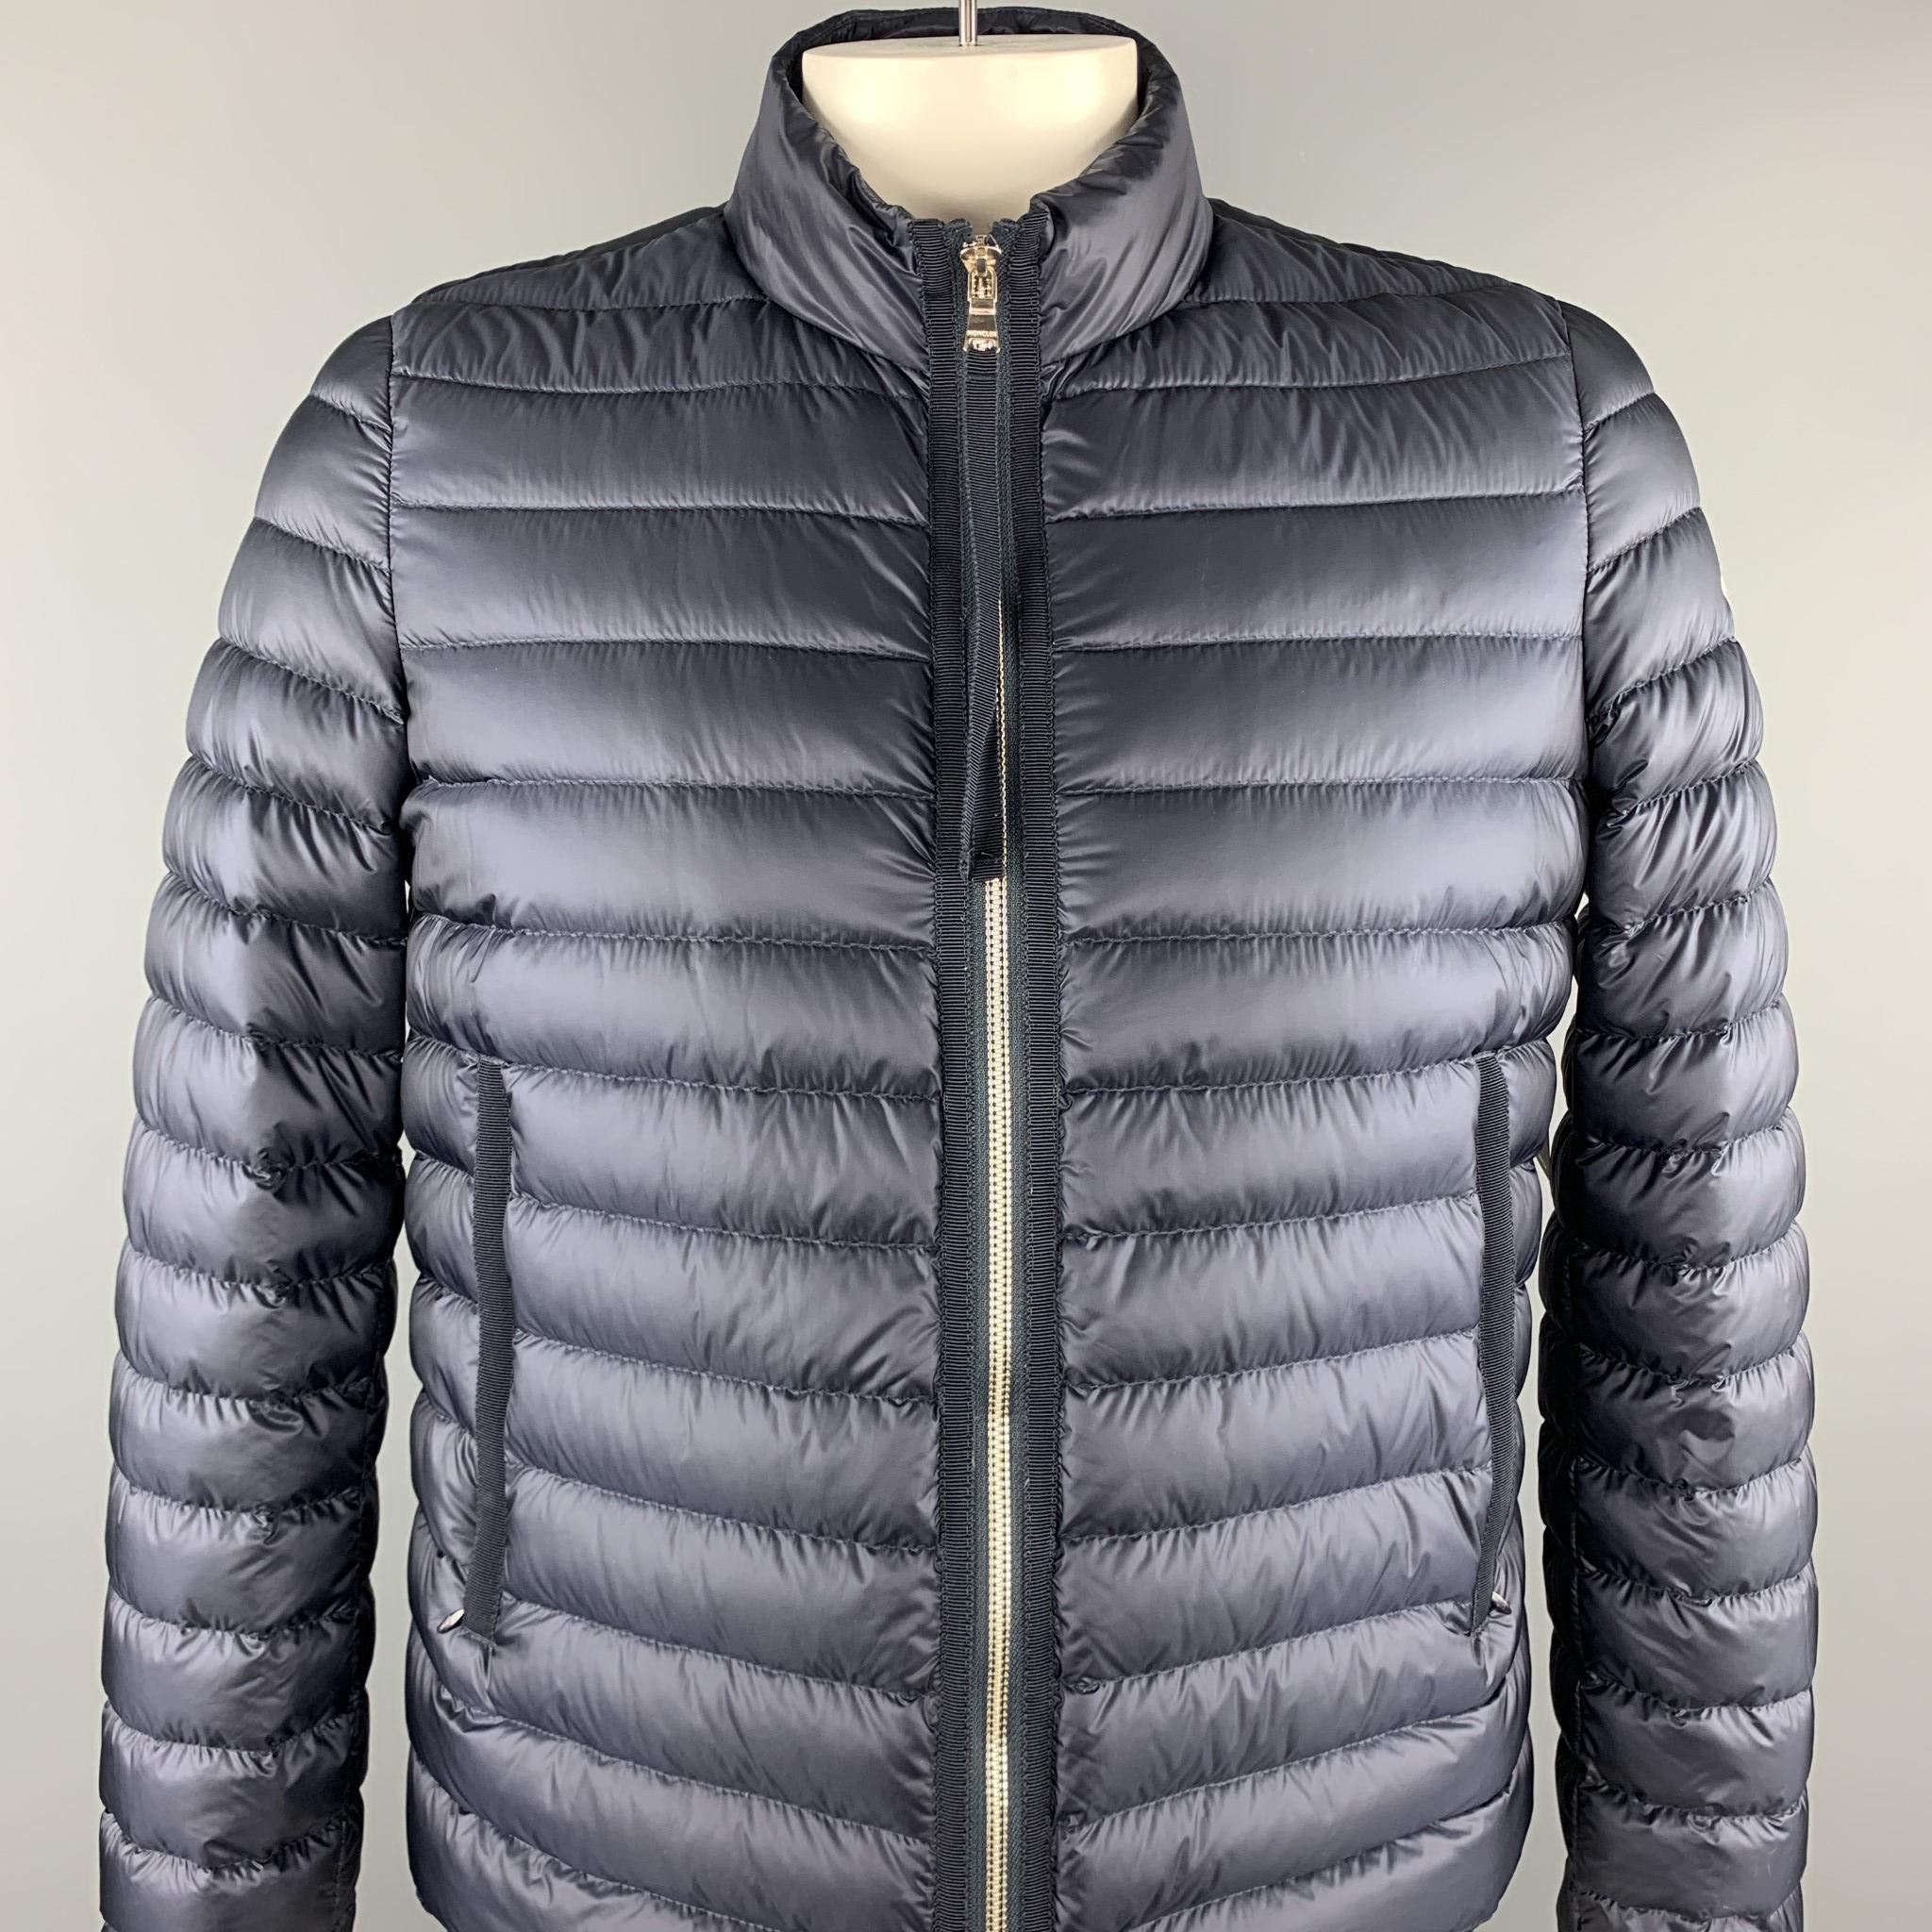 MONCLER LONGUE SAISON puffer jacket coms in light weight quilted goose filled down windbreaker fabric with a high neck, zip front, and drawstring elastic liner waistband. With pouch. 

Excellent Pre-Owned Condition.
Marked: JP